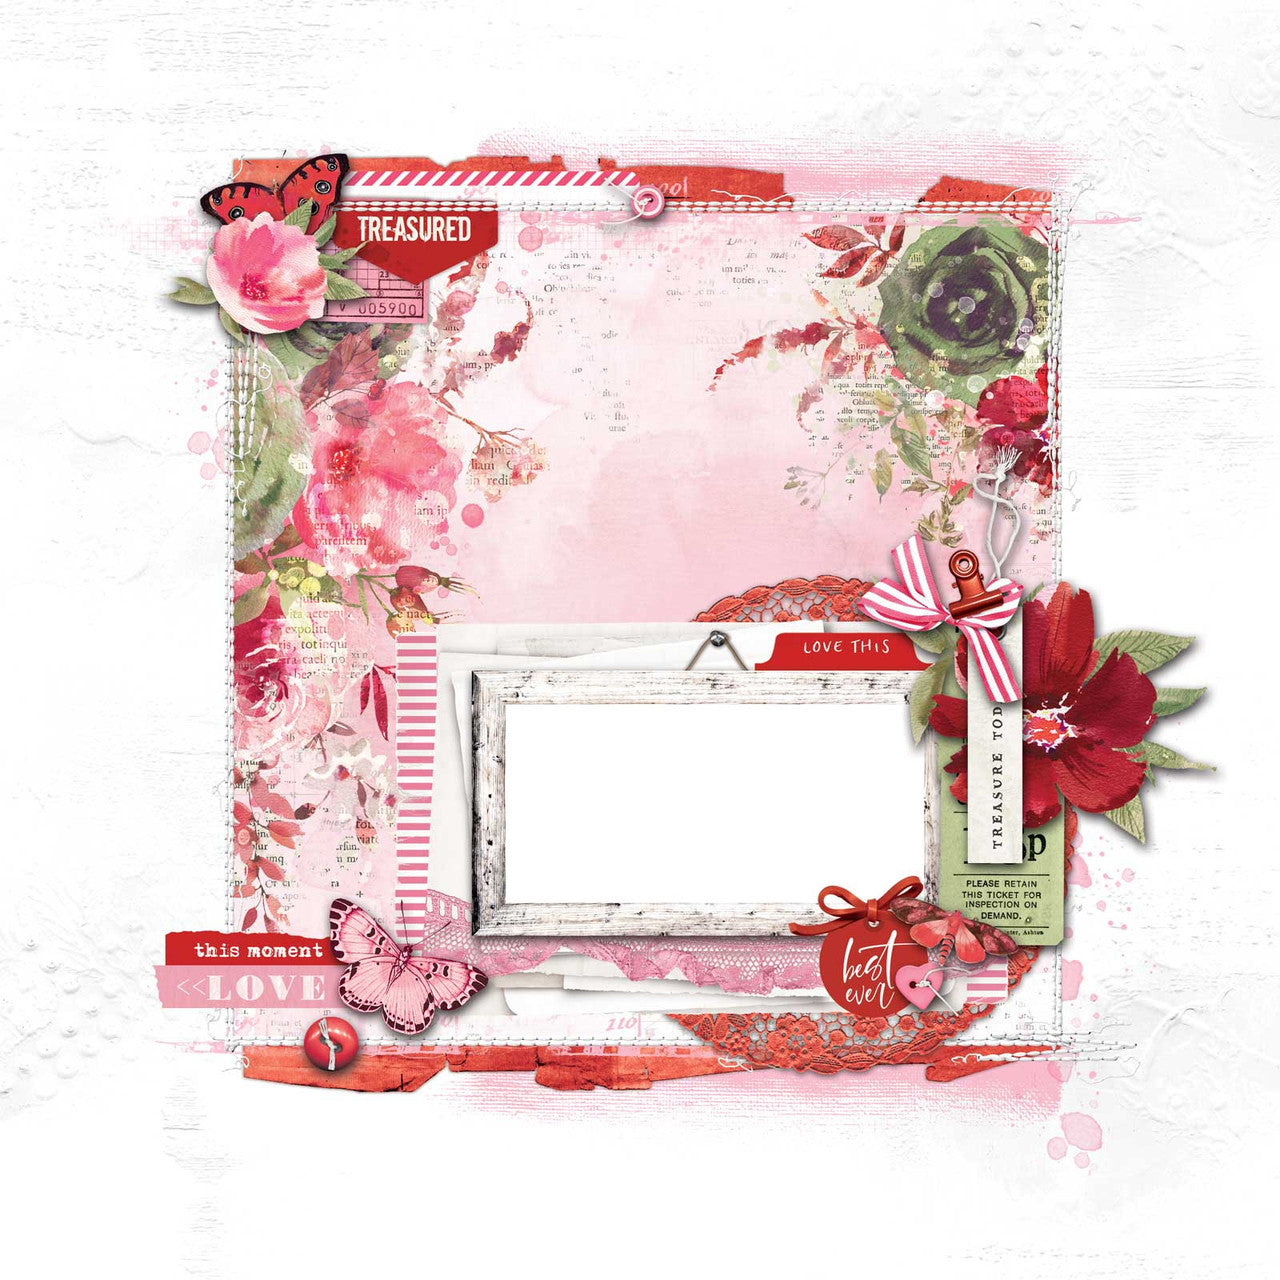  49 AND MARKET Ultimate Page Kit - ARToptions Rouge : Arts,  Crafts & Sewing